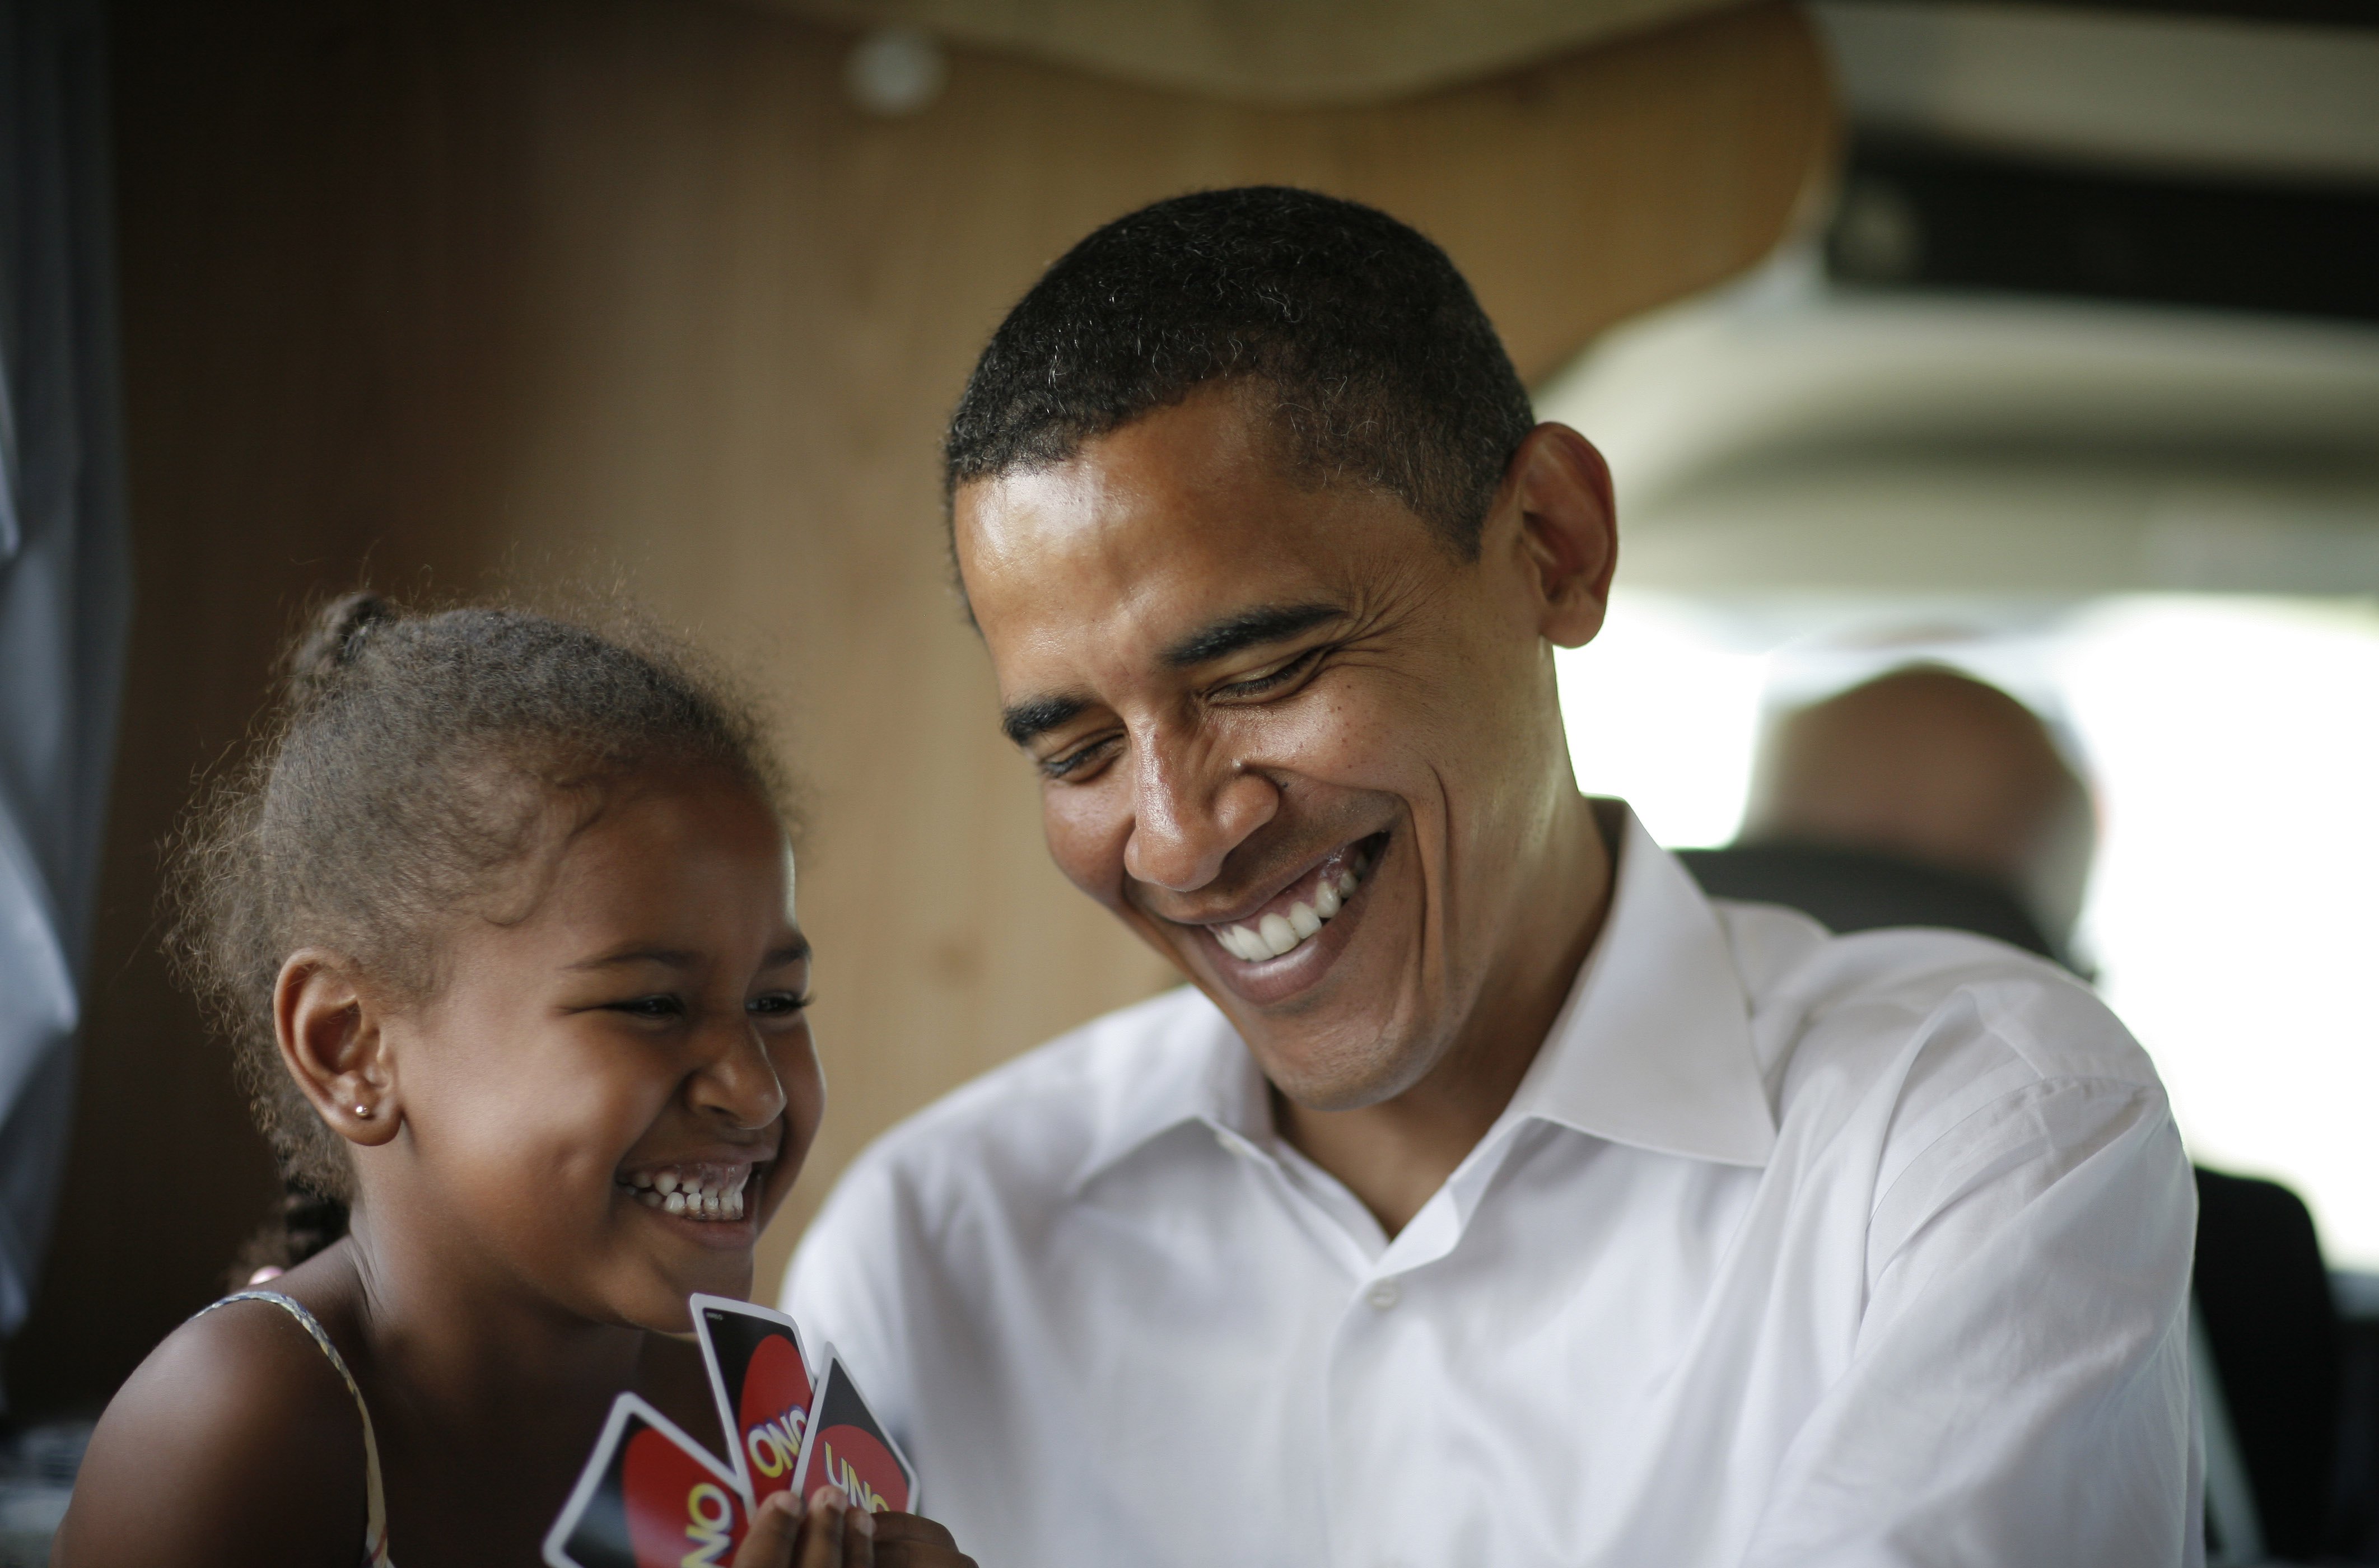 Sasha and Barack Obama playing cards in their RV  while on a campaign swing between Oskaloosa and Pella, Iowa on July 4, 2007. | Source: Getty Images